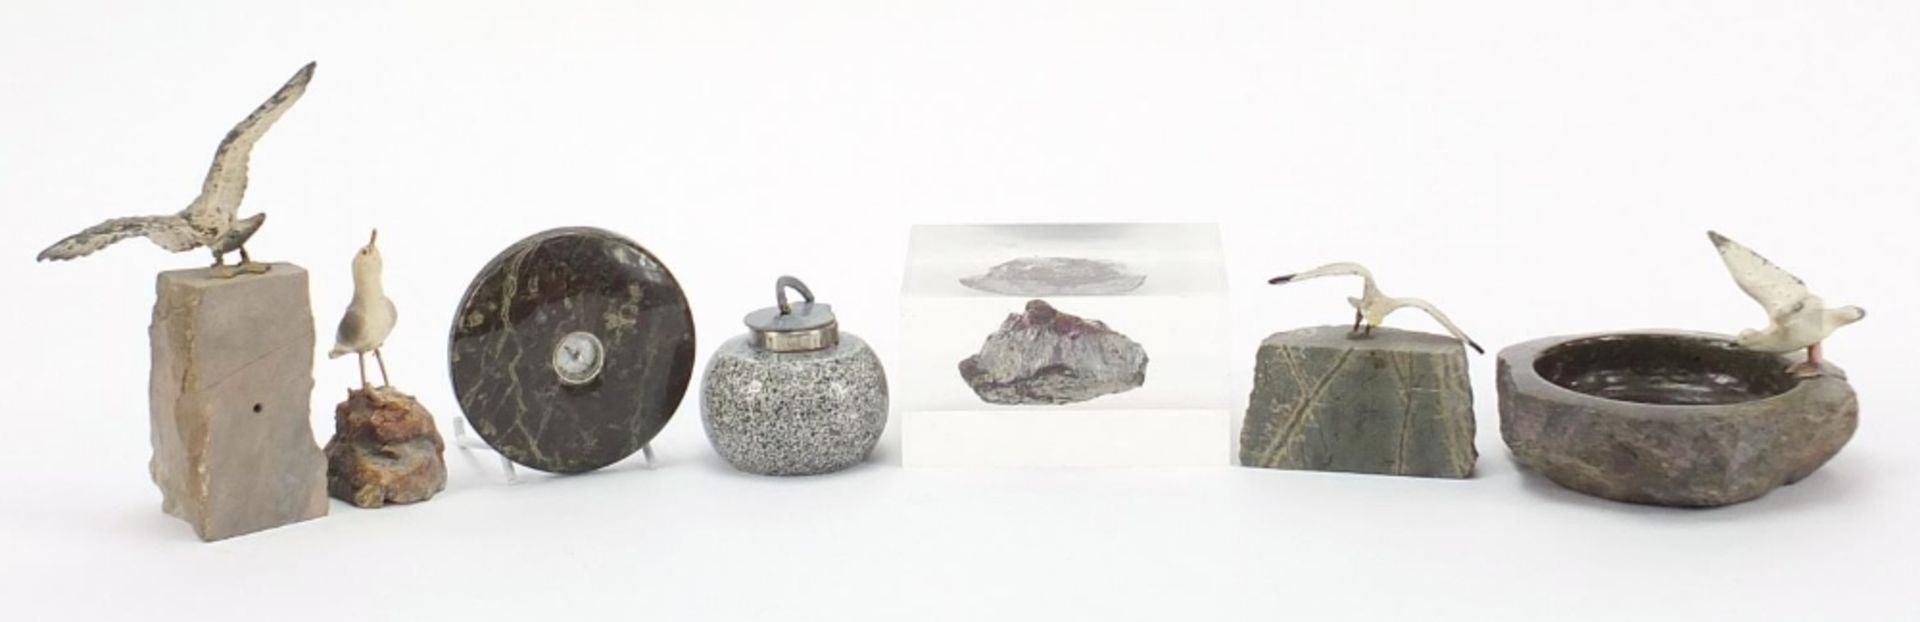 Rocks and hardstones including a serpentine marble compass design paperweight and cold painted - Image 2 of 10